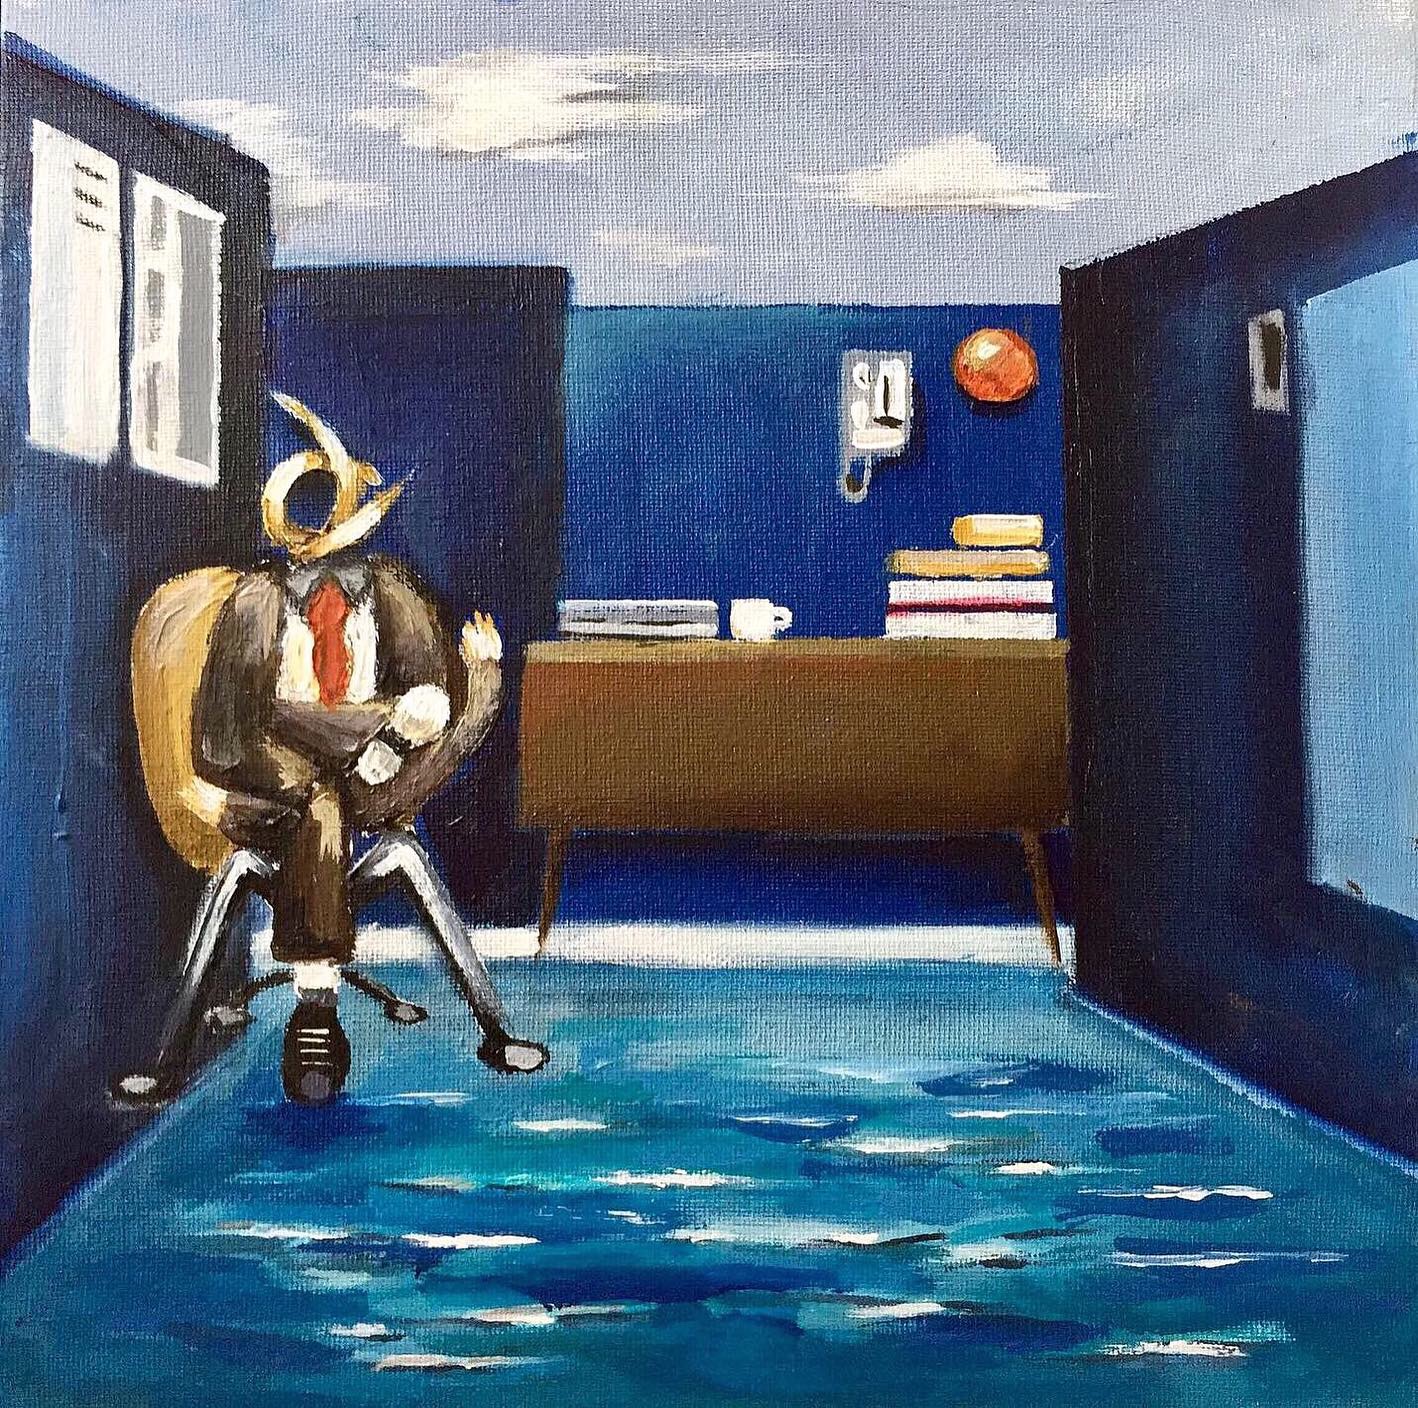 ‘ 9-5 ‘ acrylic painting on 12 x 12 inch canvas. Depicting a man stuck in his miserable 9-5 office job pinning his hopes on that all inclusive beach holiday once a year.